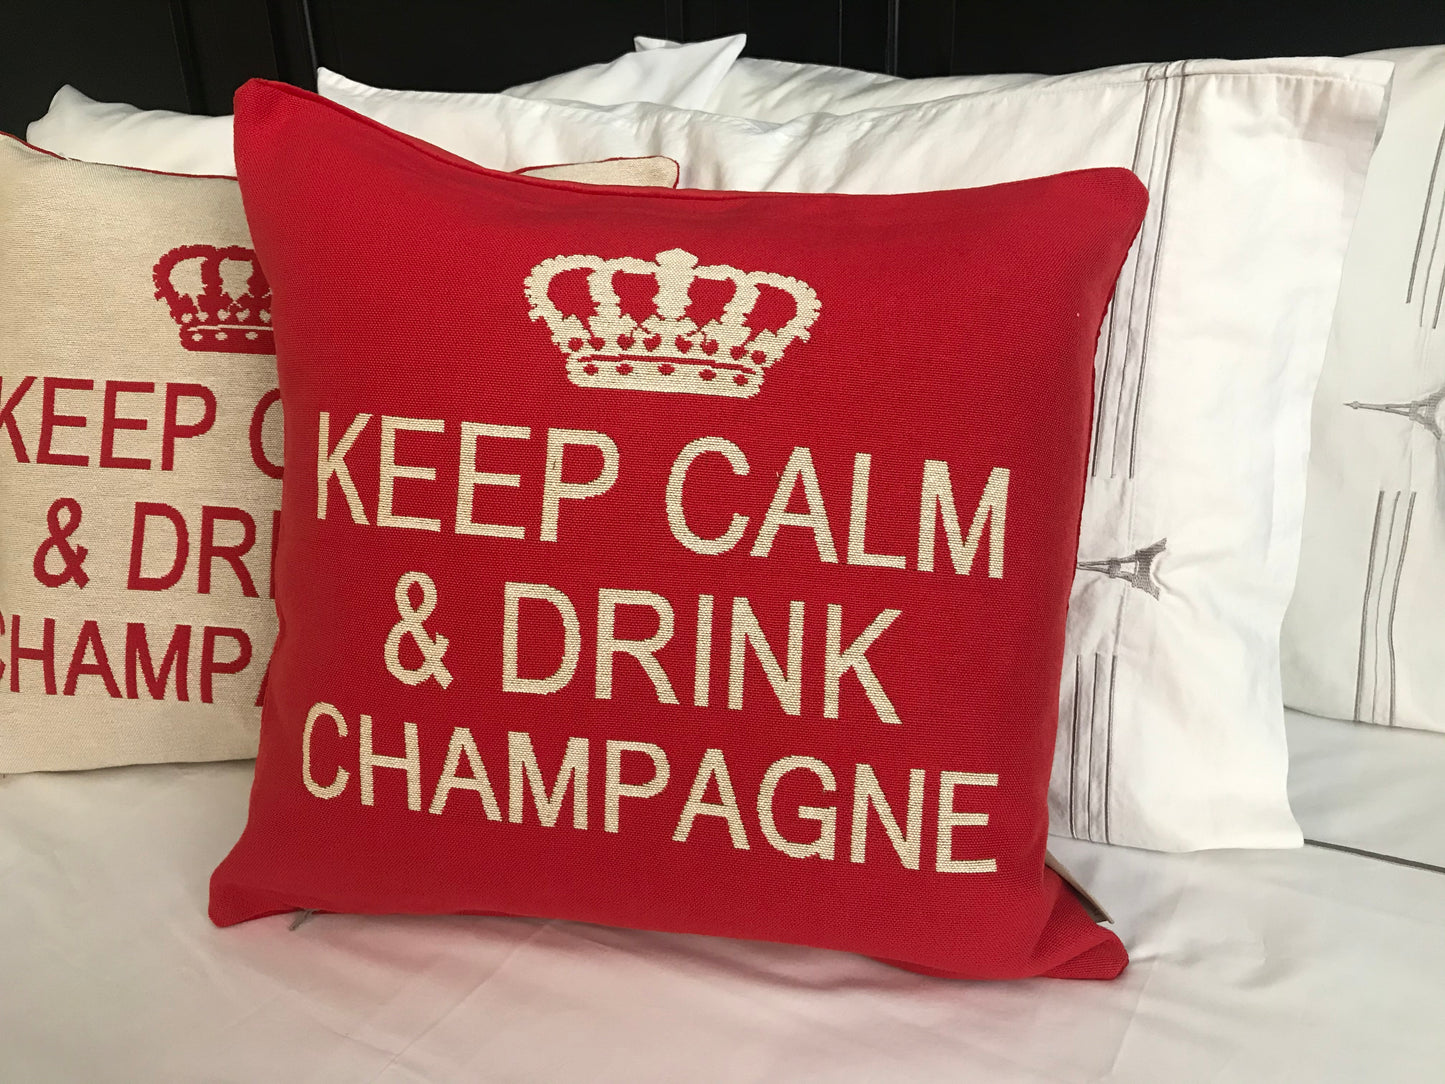 Keep Calm and Drink Champagne Decorative Pillow Cover - (Red and Cream)